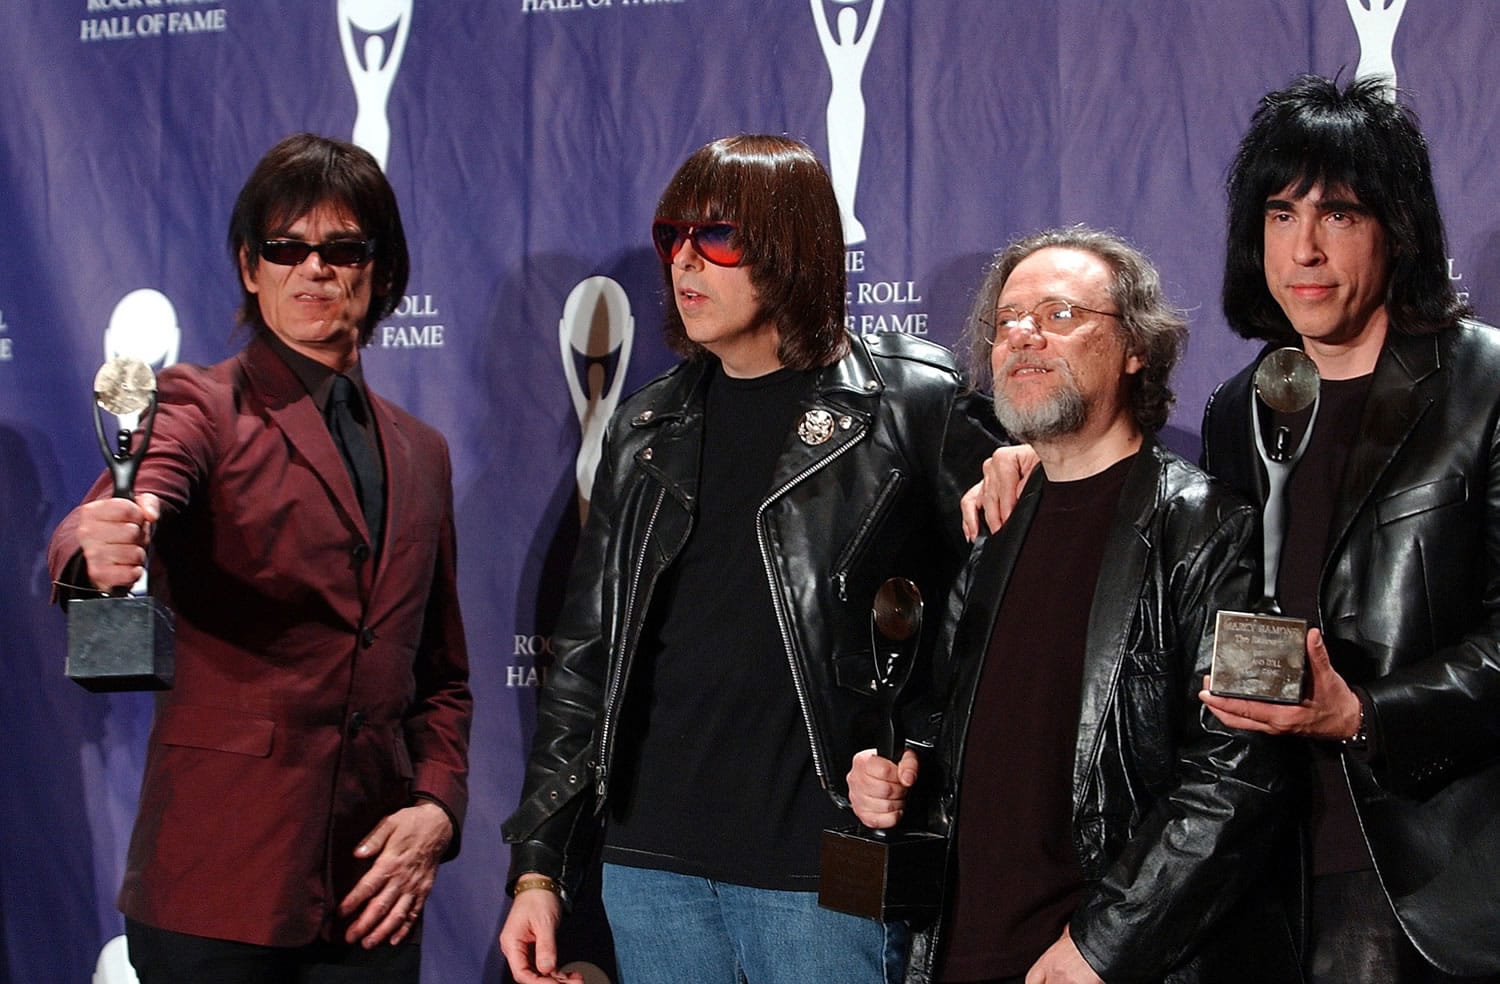 Members of the Ramones, from left to right, Dee Dee, Johnny, Tommy and Marky Ramone hold their awards March 18, 2002, after being inducted at the Rock and Roll Hall of Fame induction ceremony at New York's Waldorf Astoria. A business associate says Tommy, the last surviving member of the original group, has died.